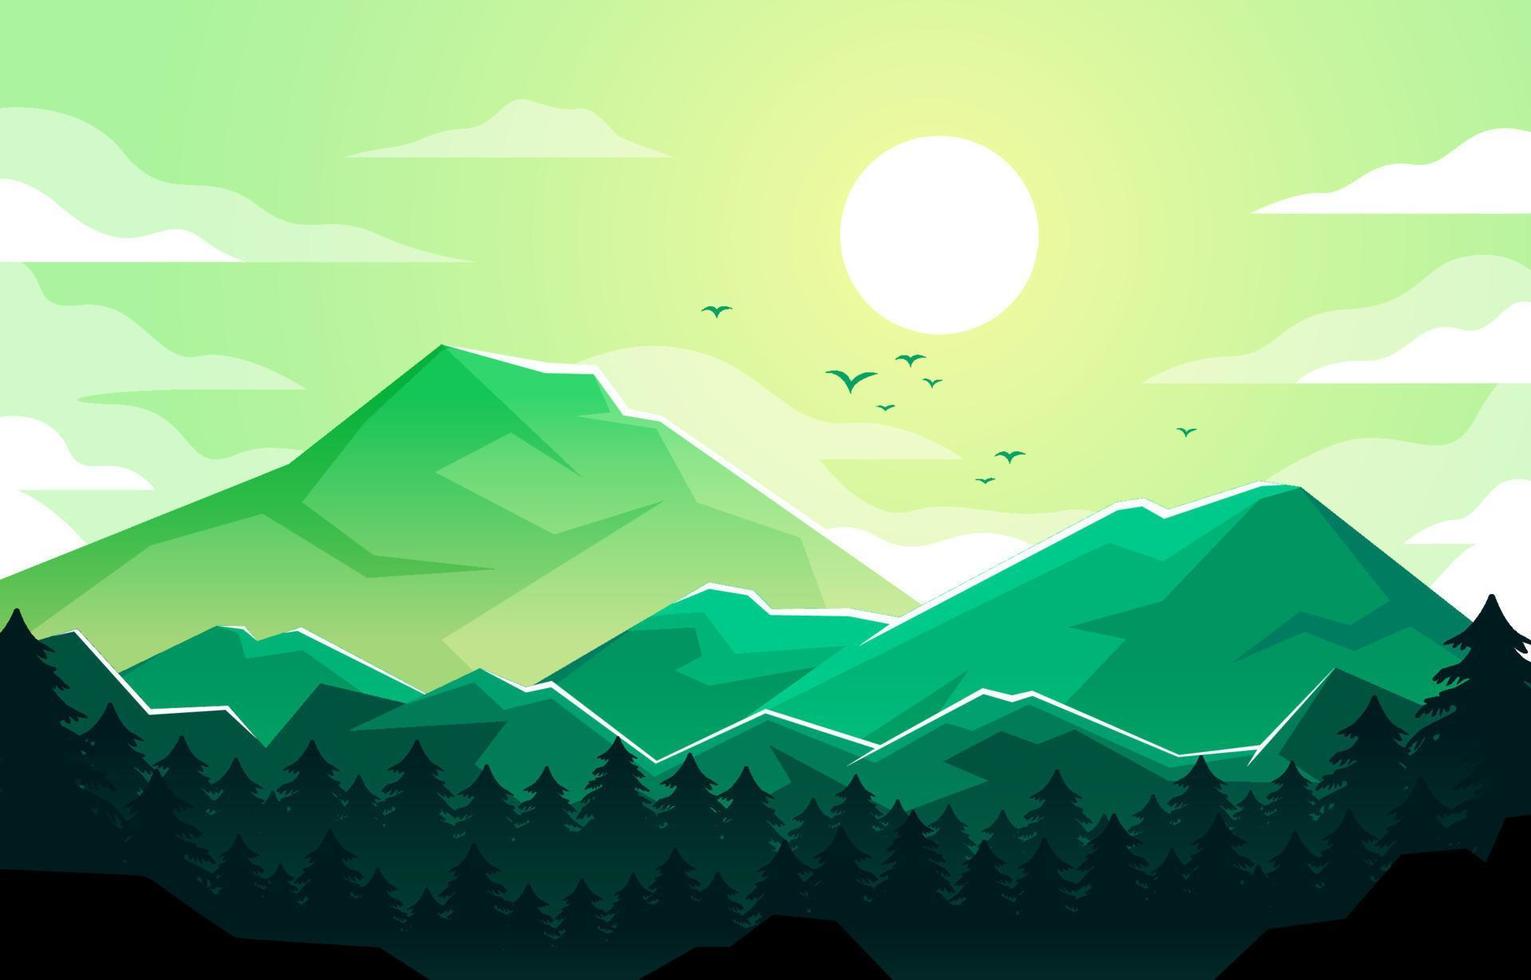 Monochromatic Nature Pine Forest and Mountain Background vector